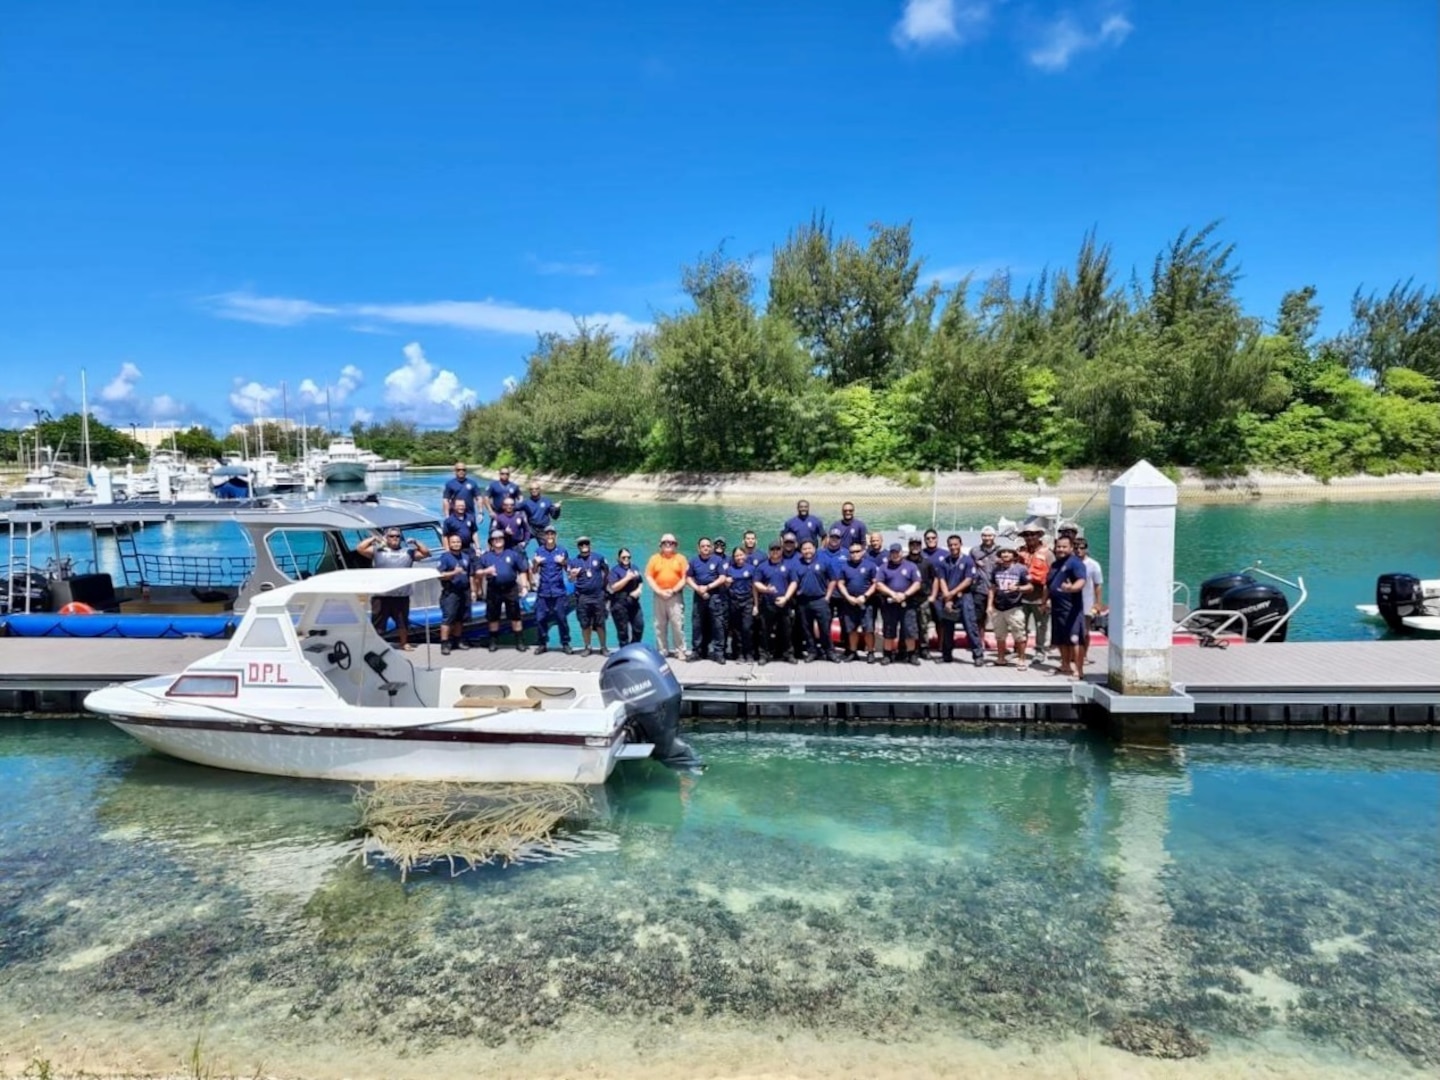 Responders Conclude Successful Search and Rescue Exercise in Saipan